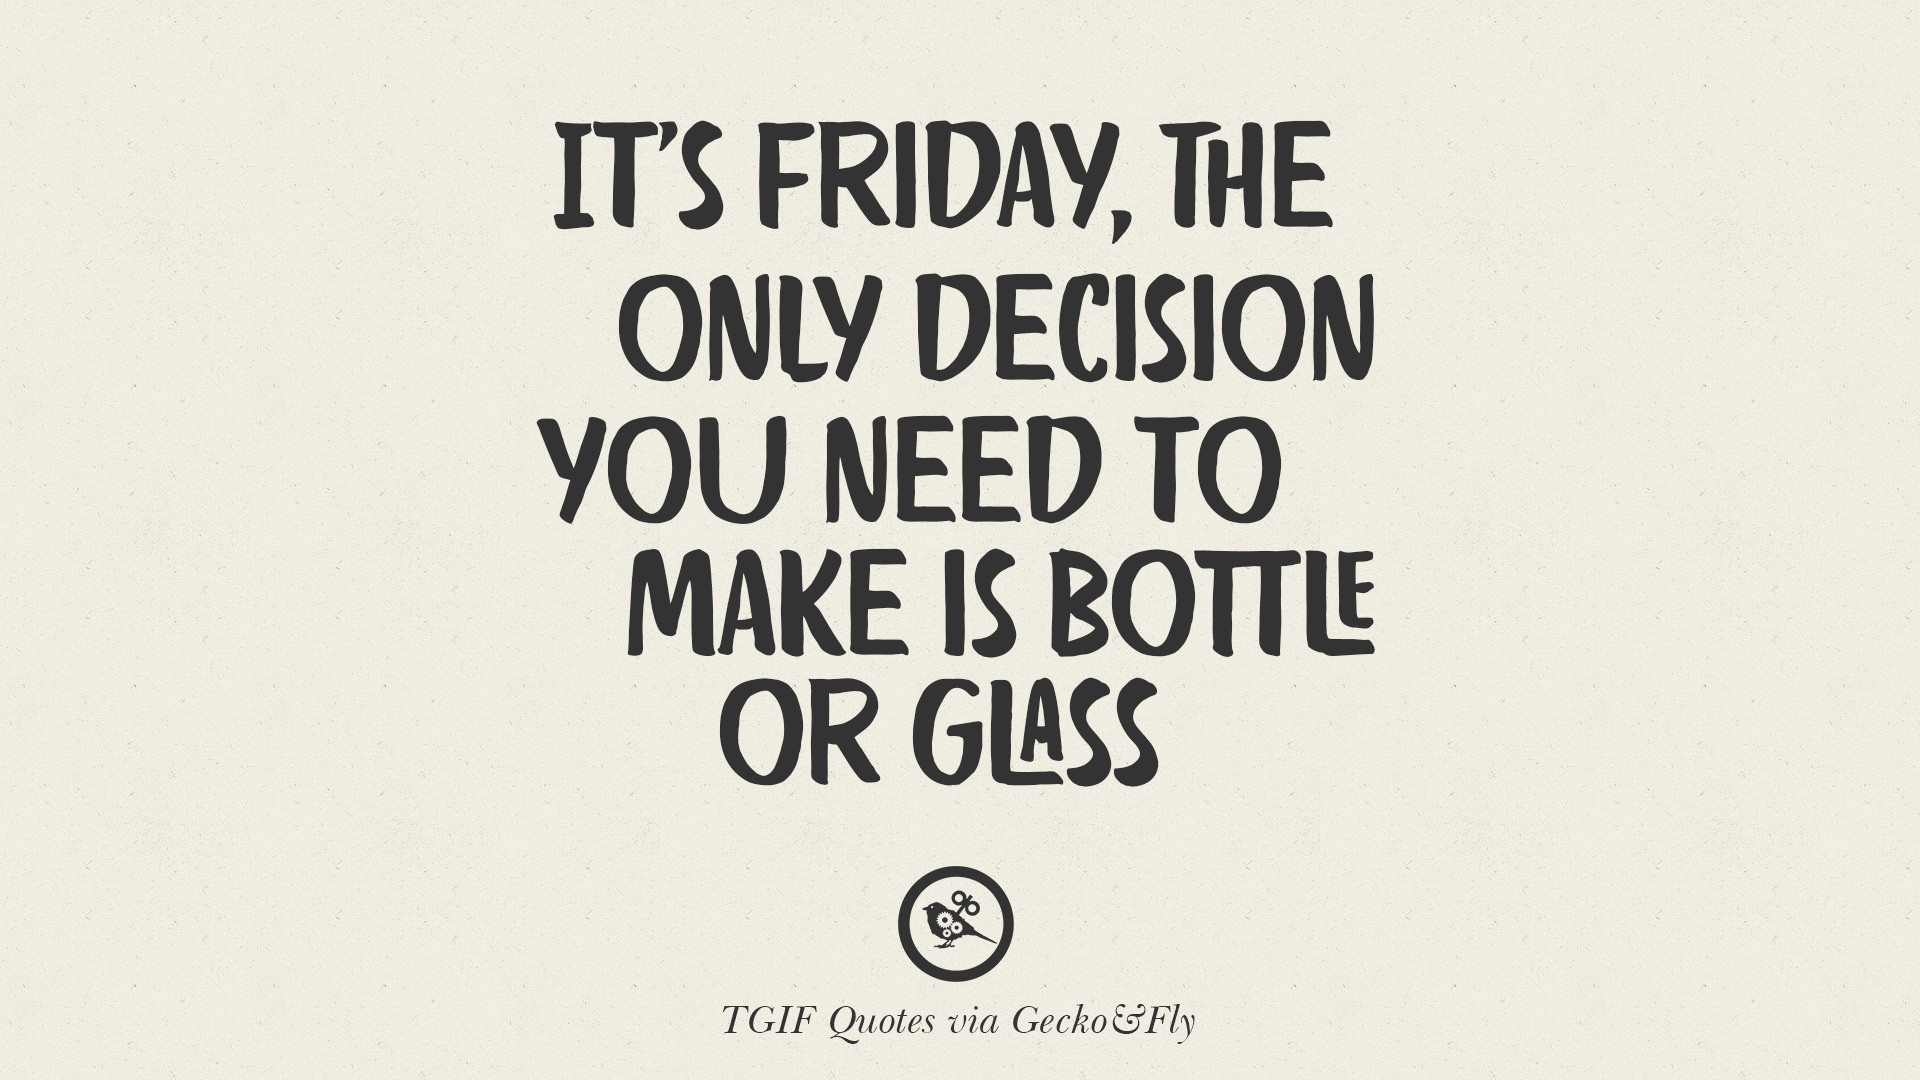 Funny Its Friday Quotes
 20 TGIF [ Thank God It s Friday ] Meme Quotes & Messages